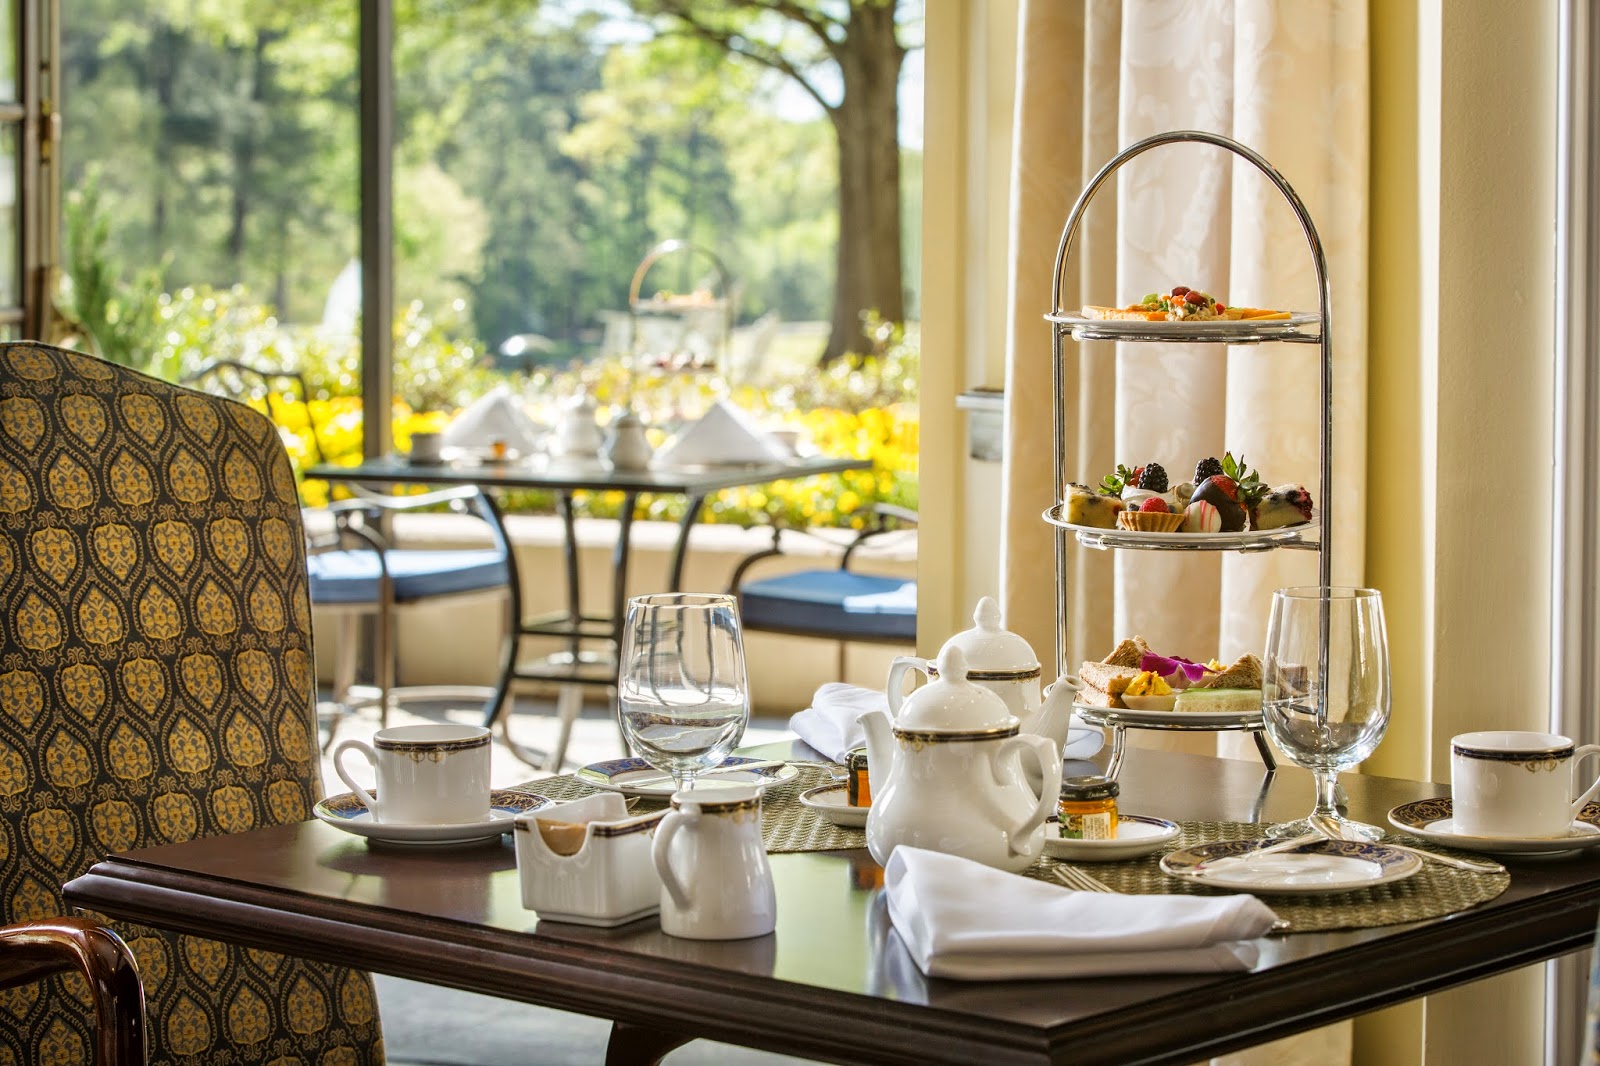 #Outaboutnc Experience Tea at the Washington Duke Inn in Durham (Two for Tea Giveaway)